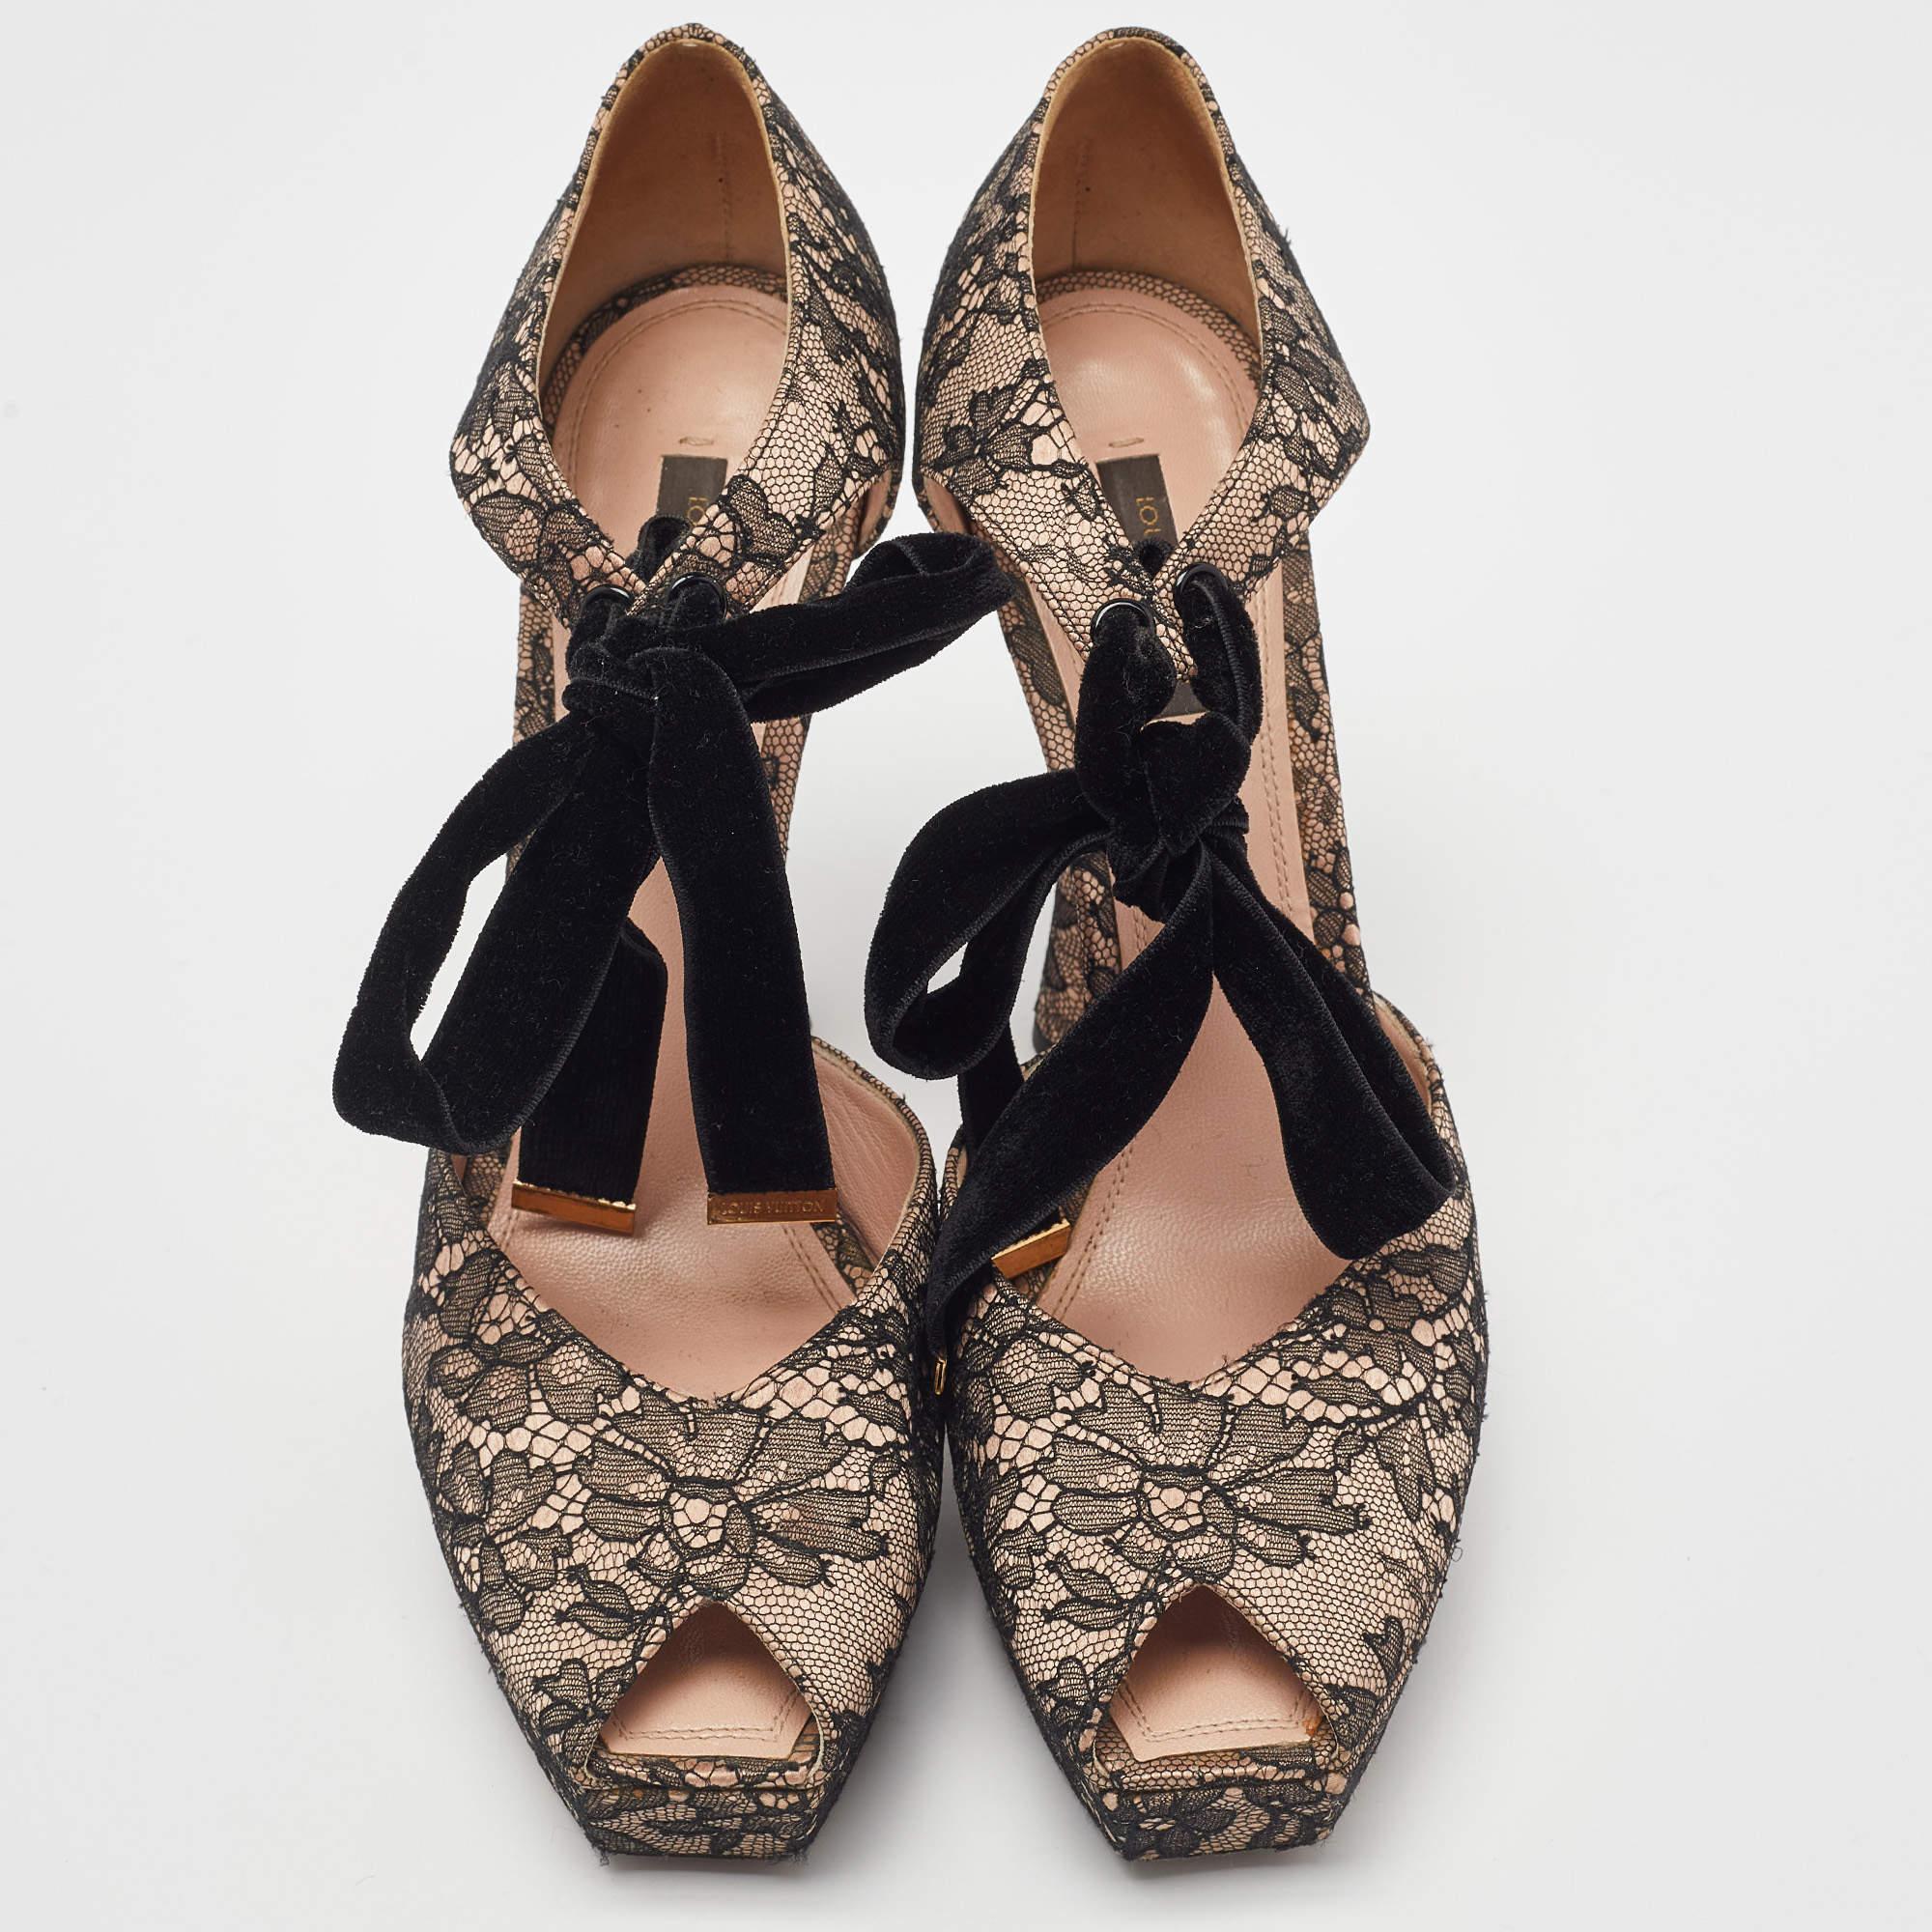 A beautiful pair of lace pumps finished with velvet ties. The pumps by Louis Vuitton feature peep toes with platforms sharply cut at the front. They are lined with leather and lifted on embellished heels.

